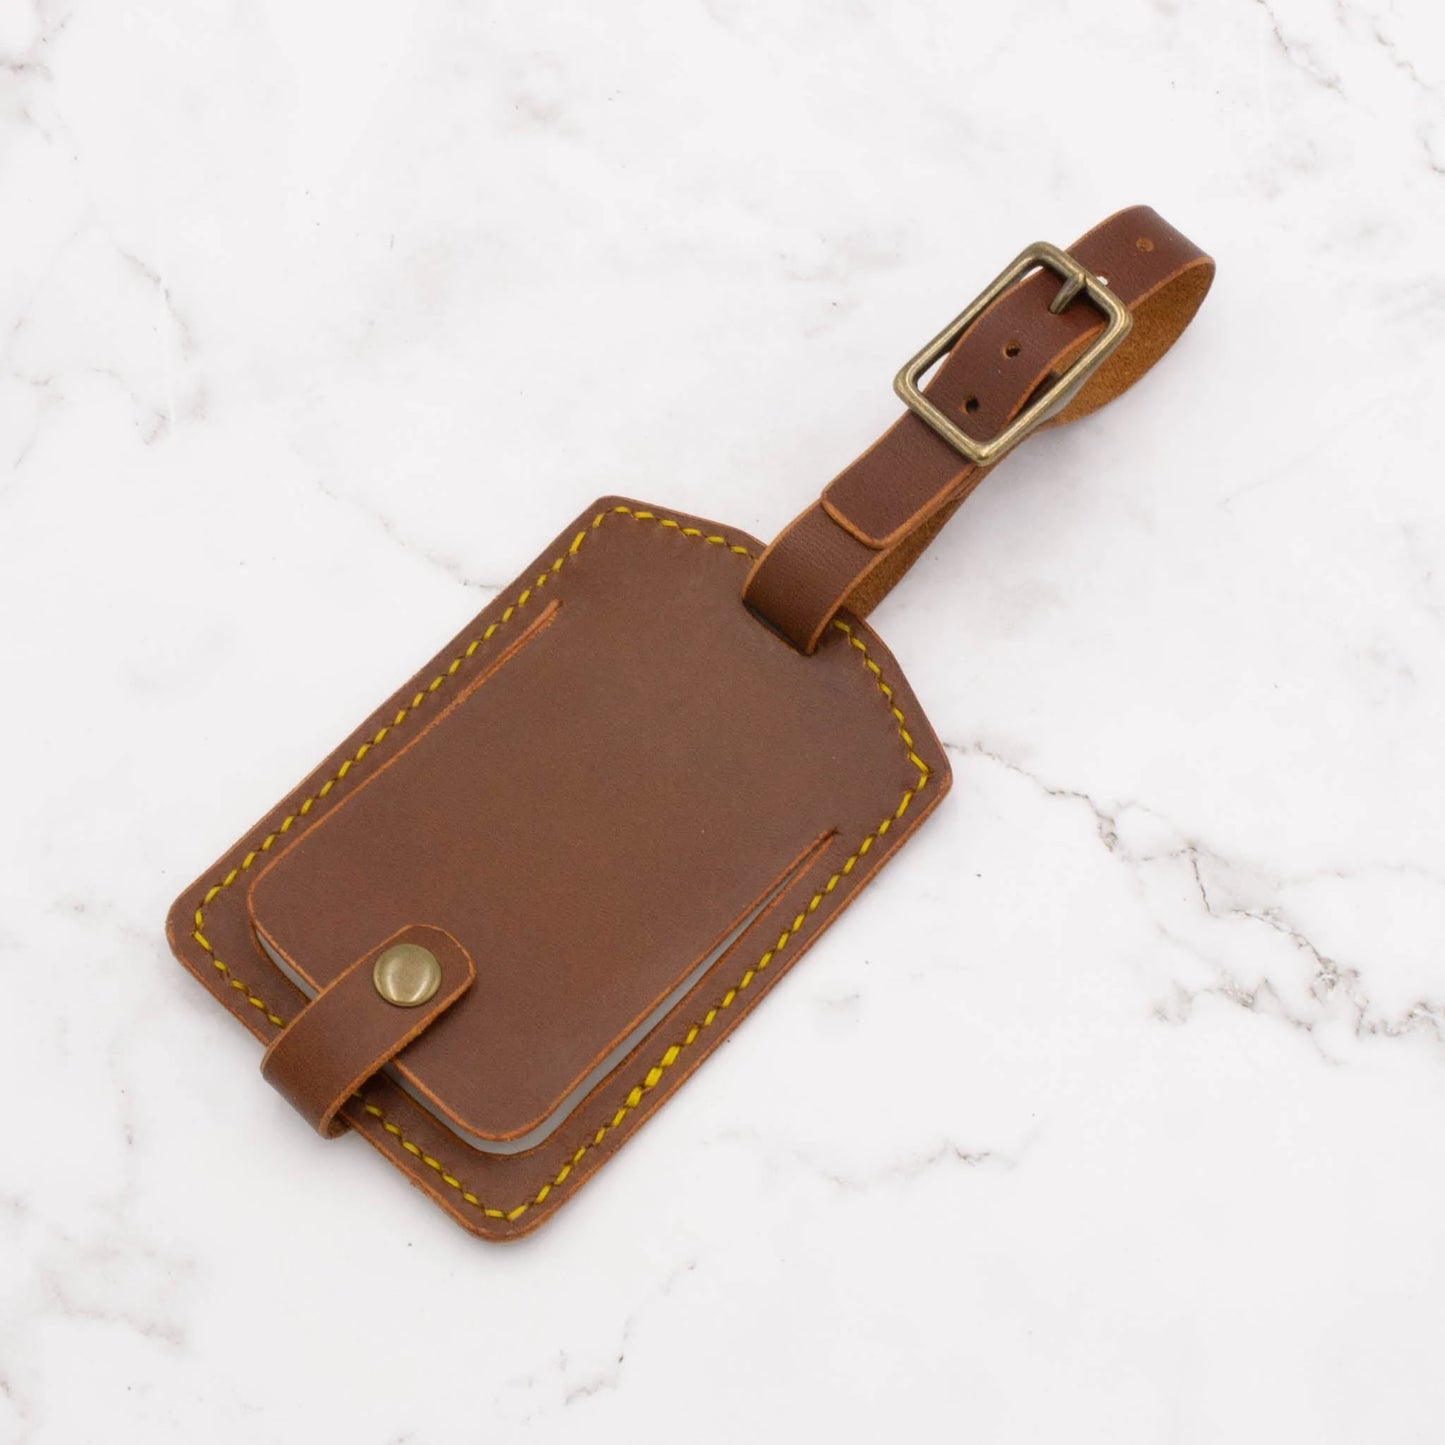 Arbor Trading Post Luggage Tag Classic Mahogany Handcrafted Leather Luggage Tag